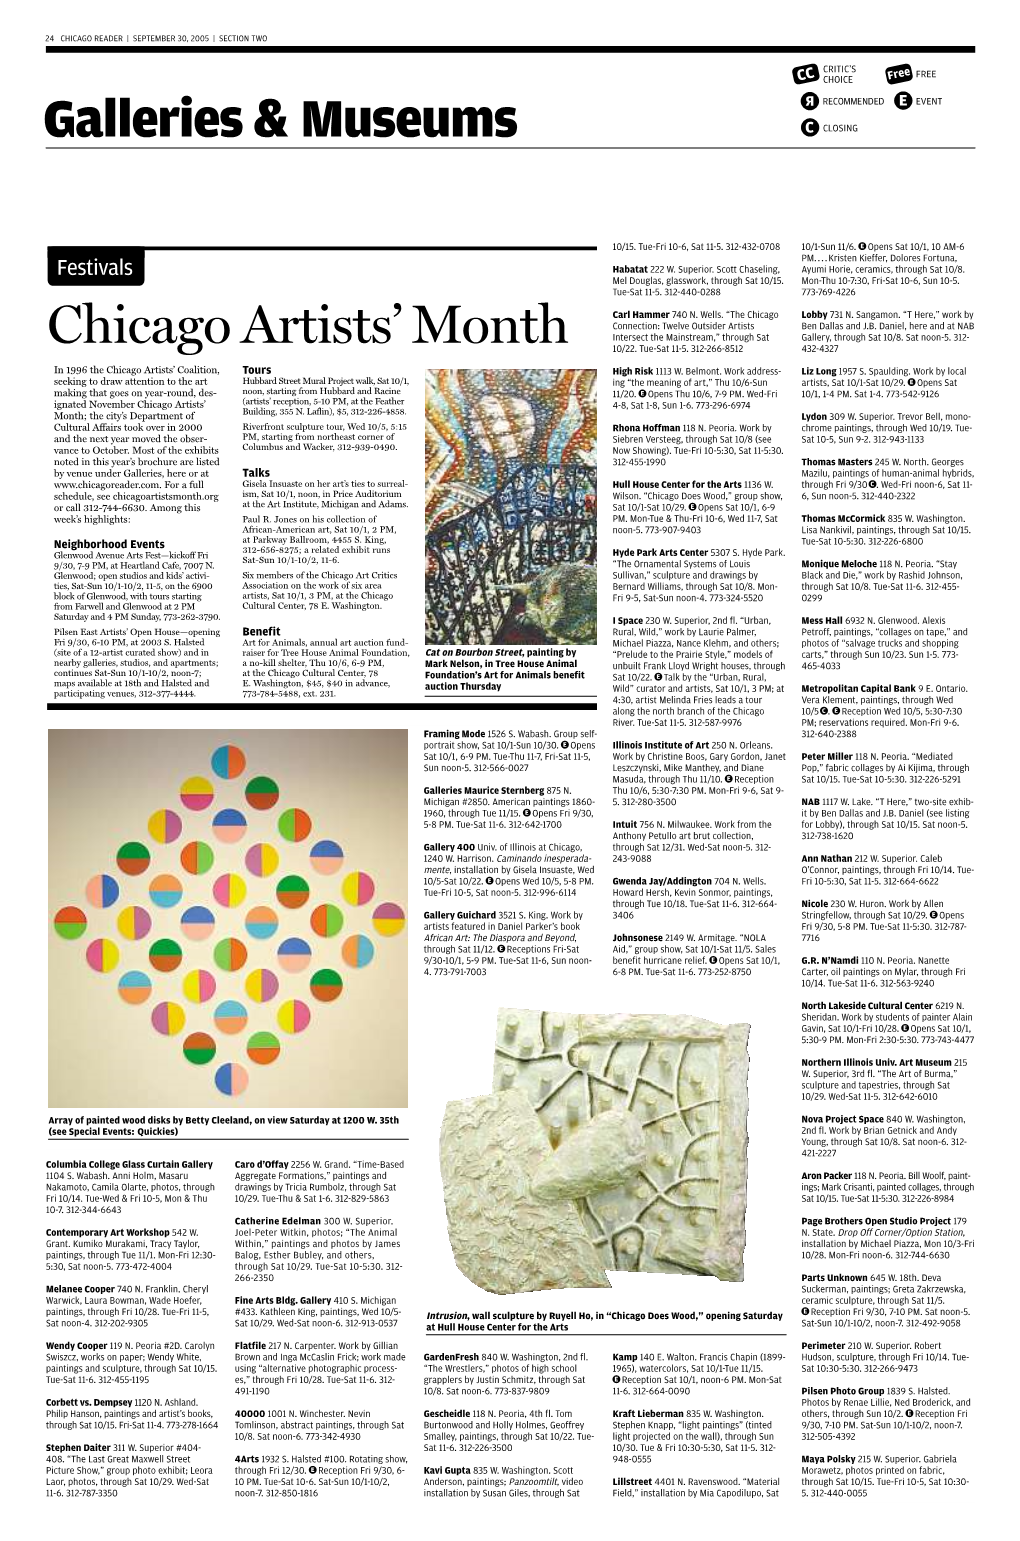 Galleries & Museums Chicago Artists' Month